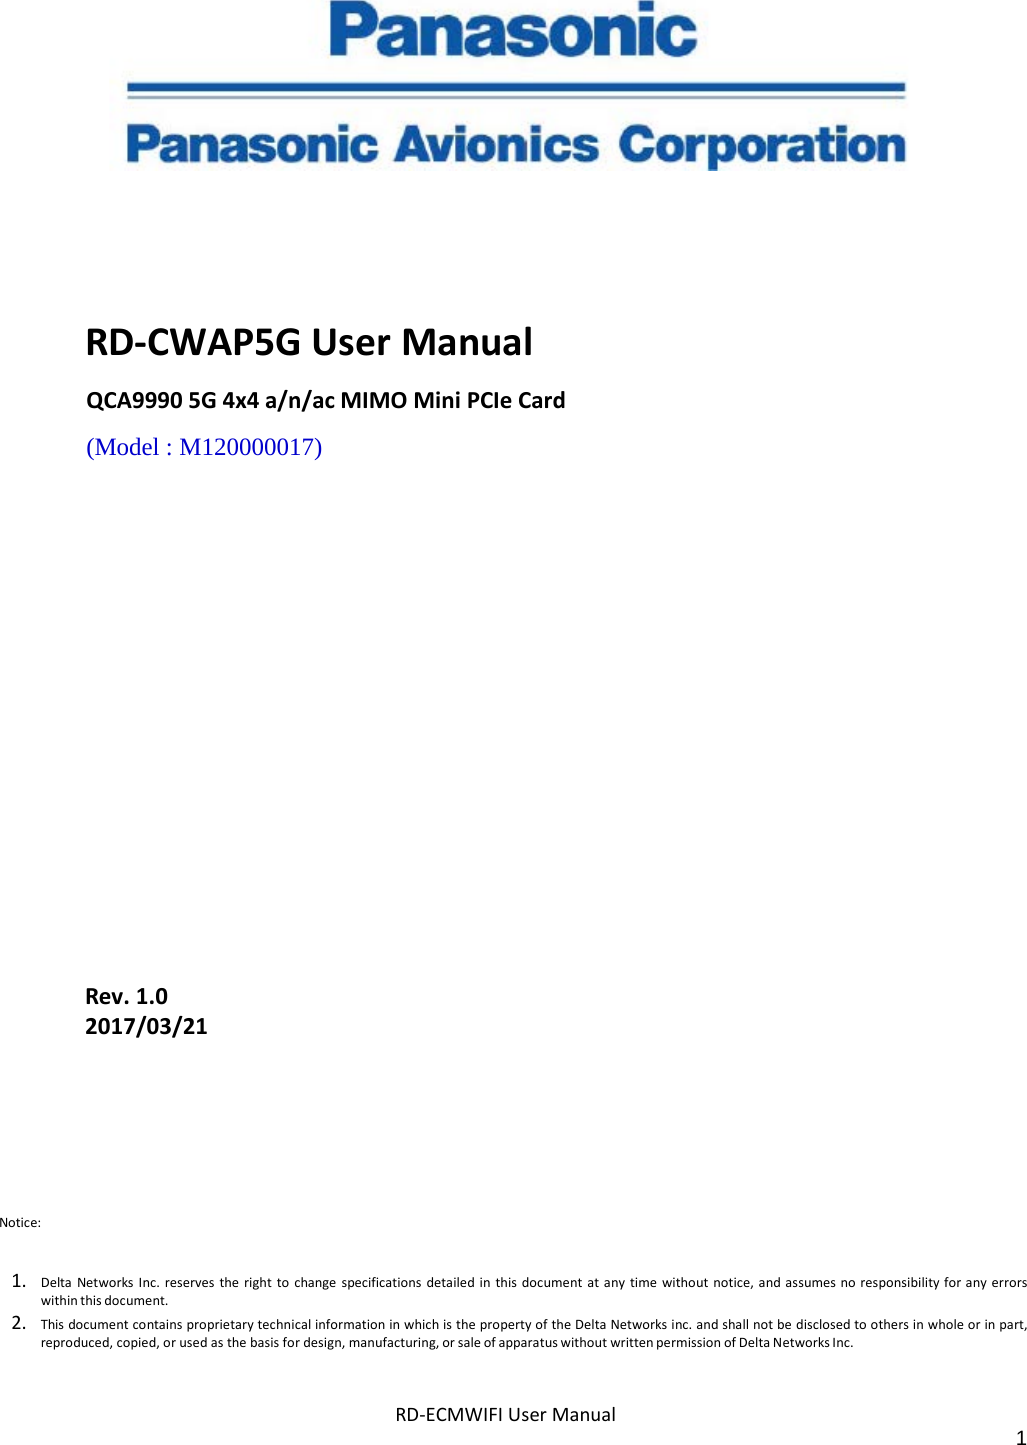 RD-ECMWIFI User Manual 1        RD-CWAP5G User Manual QCA9990 5G 4x4 a/n/ac MIMO Mini PCIe Card (Model : M120000017)                  Rev. 1.0 2017/03/21 Notice:   1. Delta Networks Inc. reserves the right to change specifications detailed in this document at any time without notice, and assumes no responsibility for any errors within this document. 2. This document contains proprietary technical information in which is the property of the Delta Networks inc. and shall not be disclosed to others in whole or in part, reproduced, copied, or used as the basis for design, manufacturing, or sale of apparatus without written permission of Delta Networks Inc. 